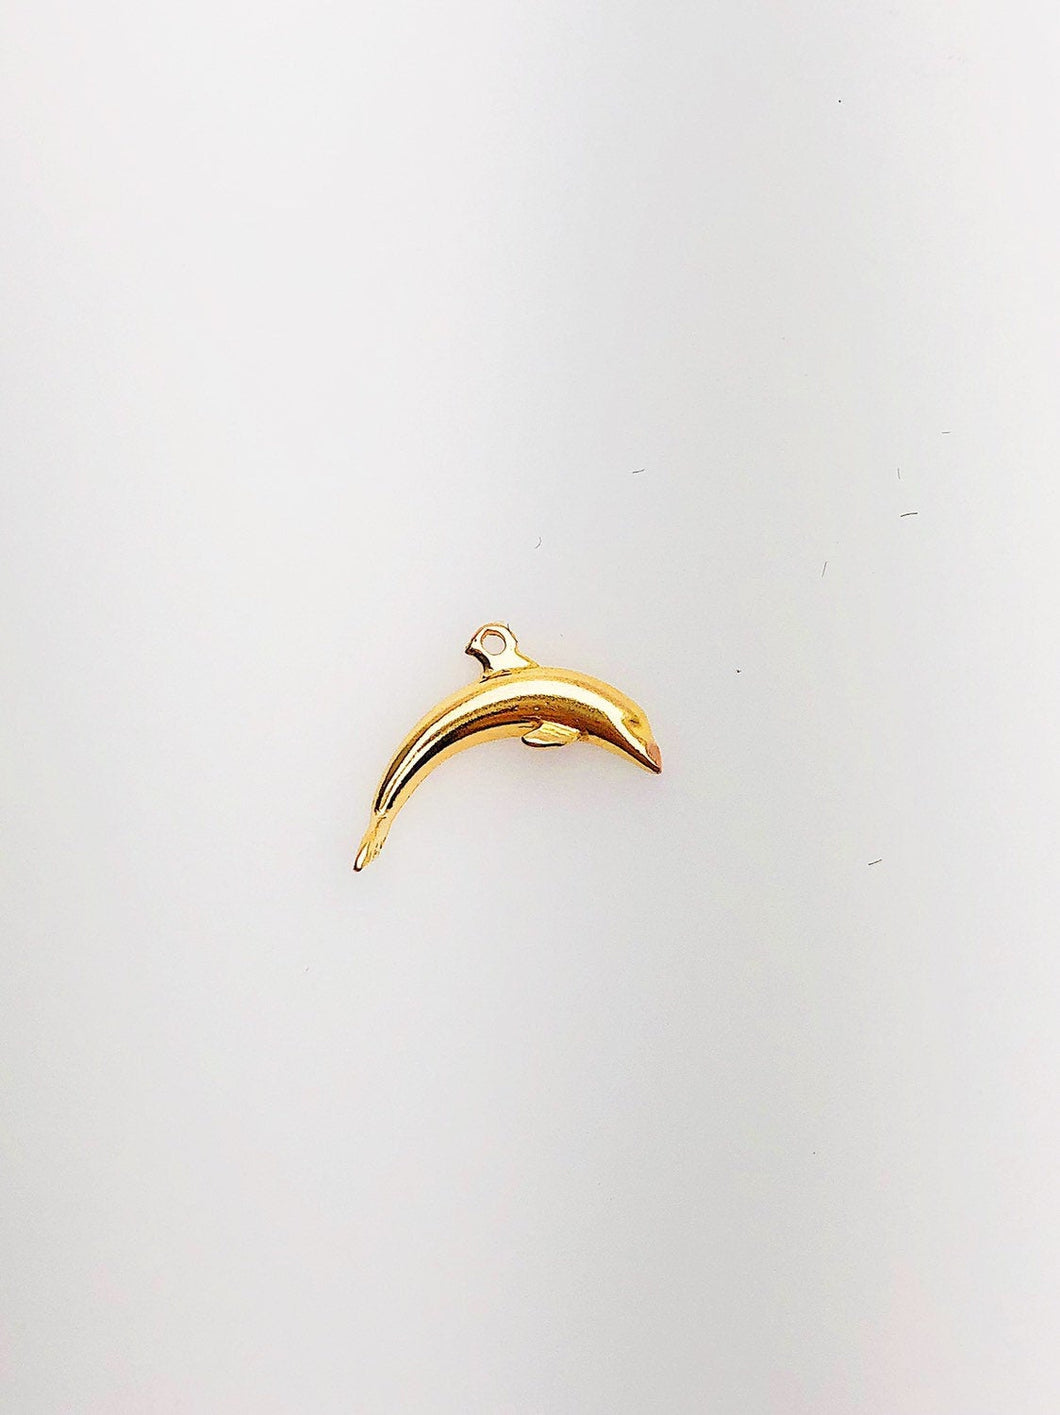 14K Solid Gold Dolphin Charm w/ Ring, 12.3x8.1mm, Made in USA (L-2)